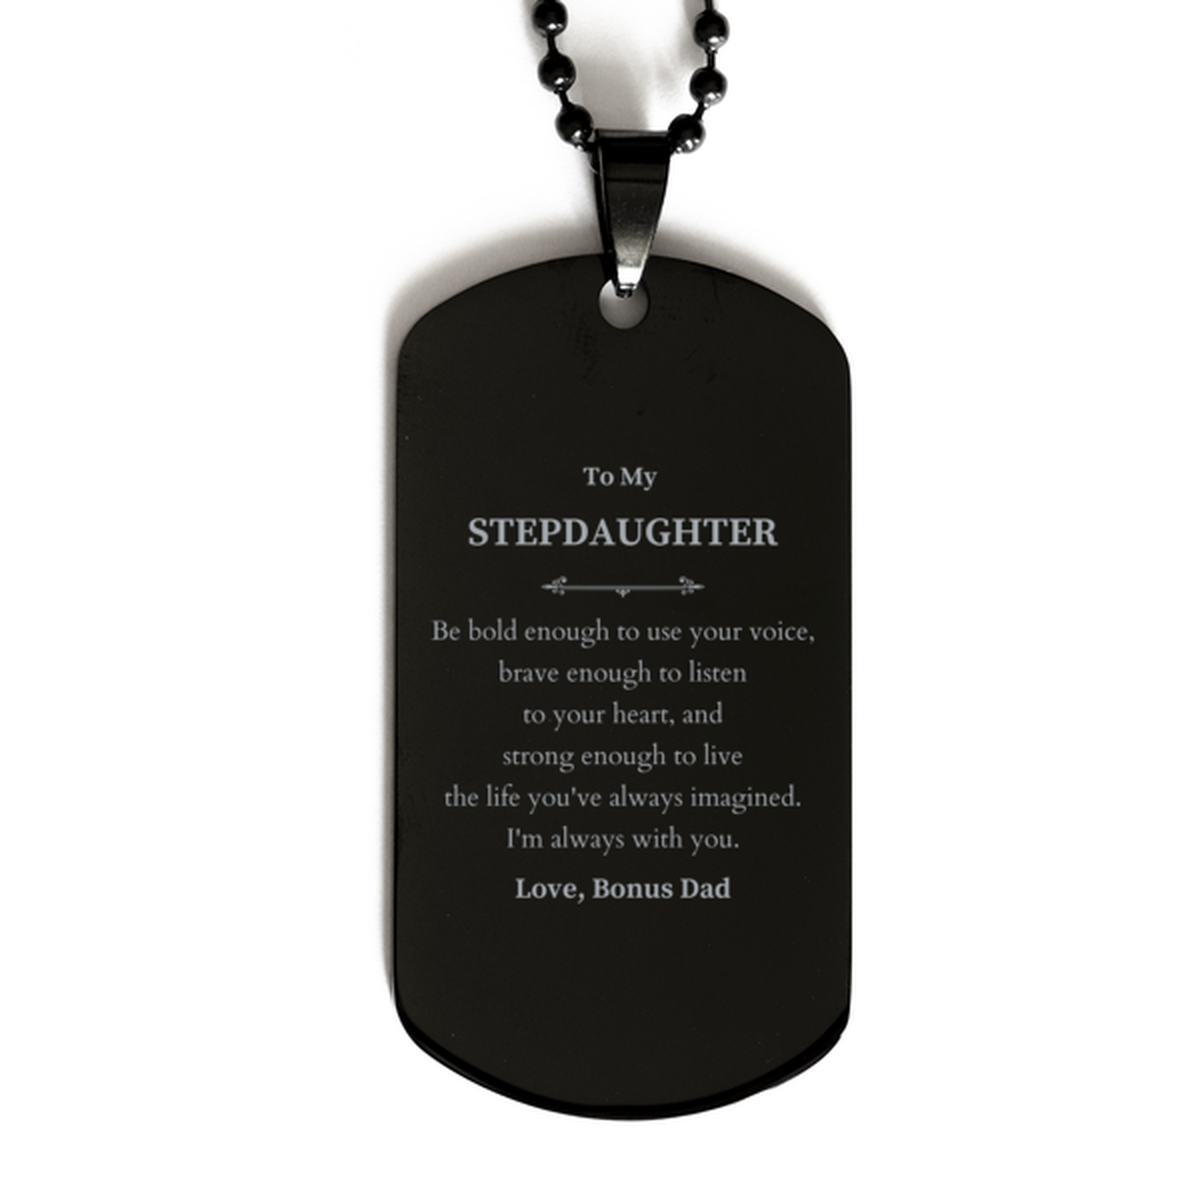 Keepsake Stepdaughter Black Dog Tag Gift Idea Graduation Christmas Birthday Stepdaughter from Bonus Dad, Stepdaughter Be bold enough to use your voice, brave enough to listen to your heart. Love, Bonus Dad